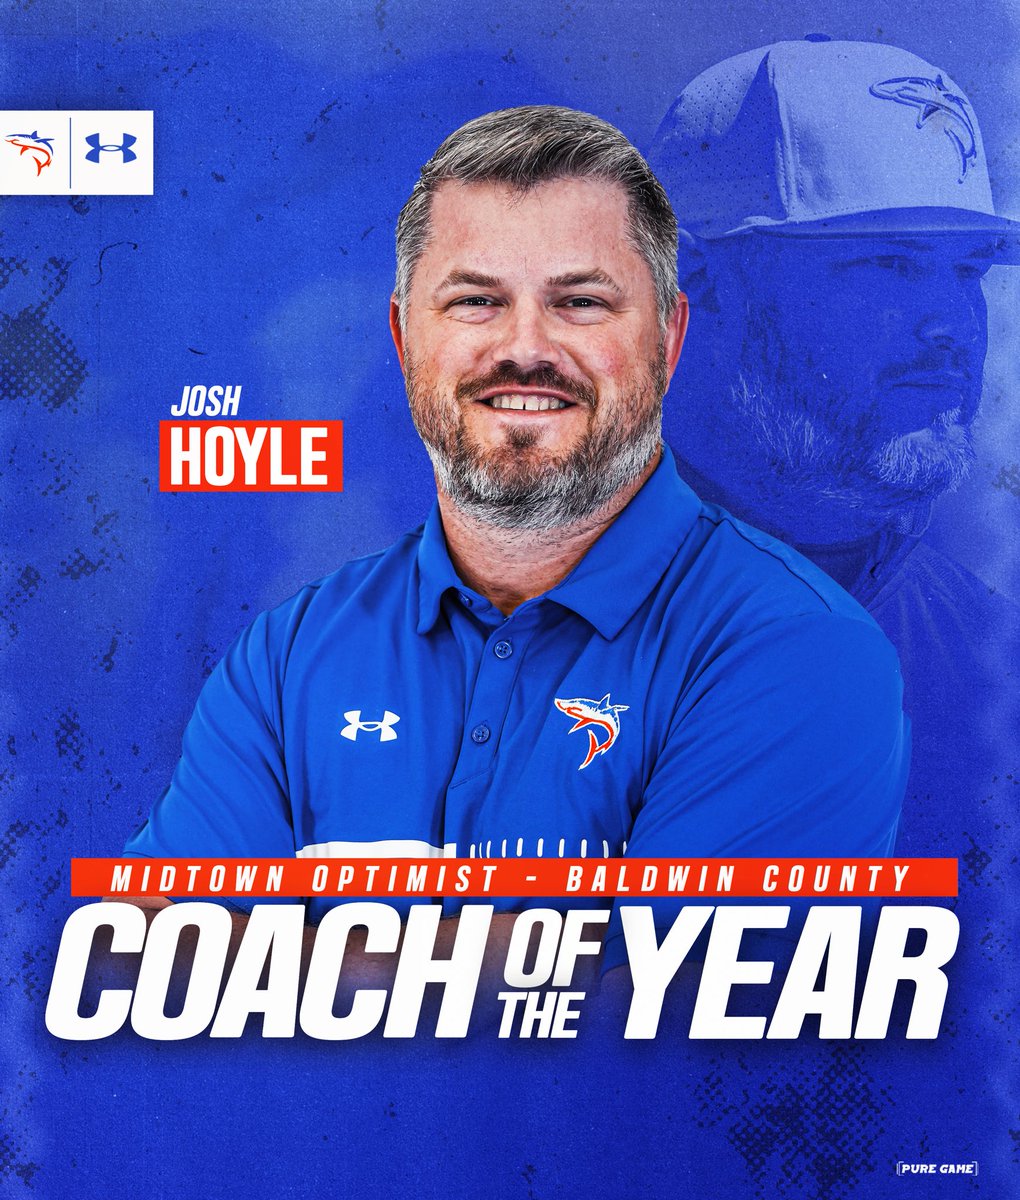 Congrats to @CoachJoshHoyle Excited to see what the future holds for OB Baseball!